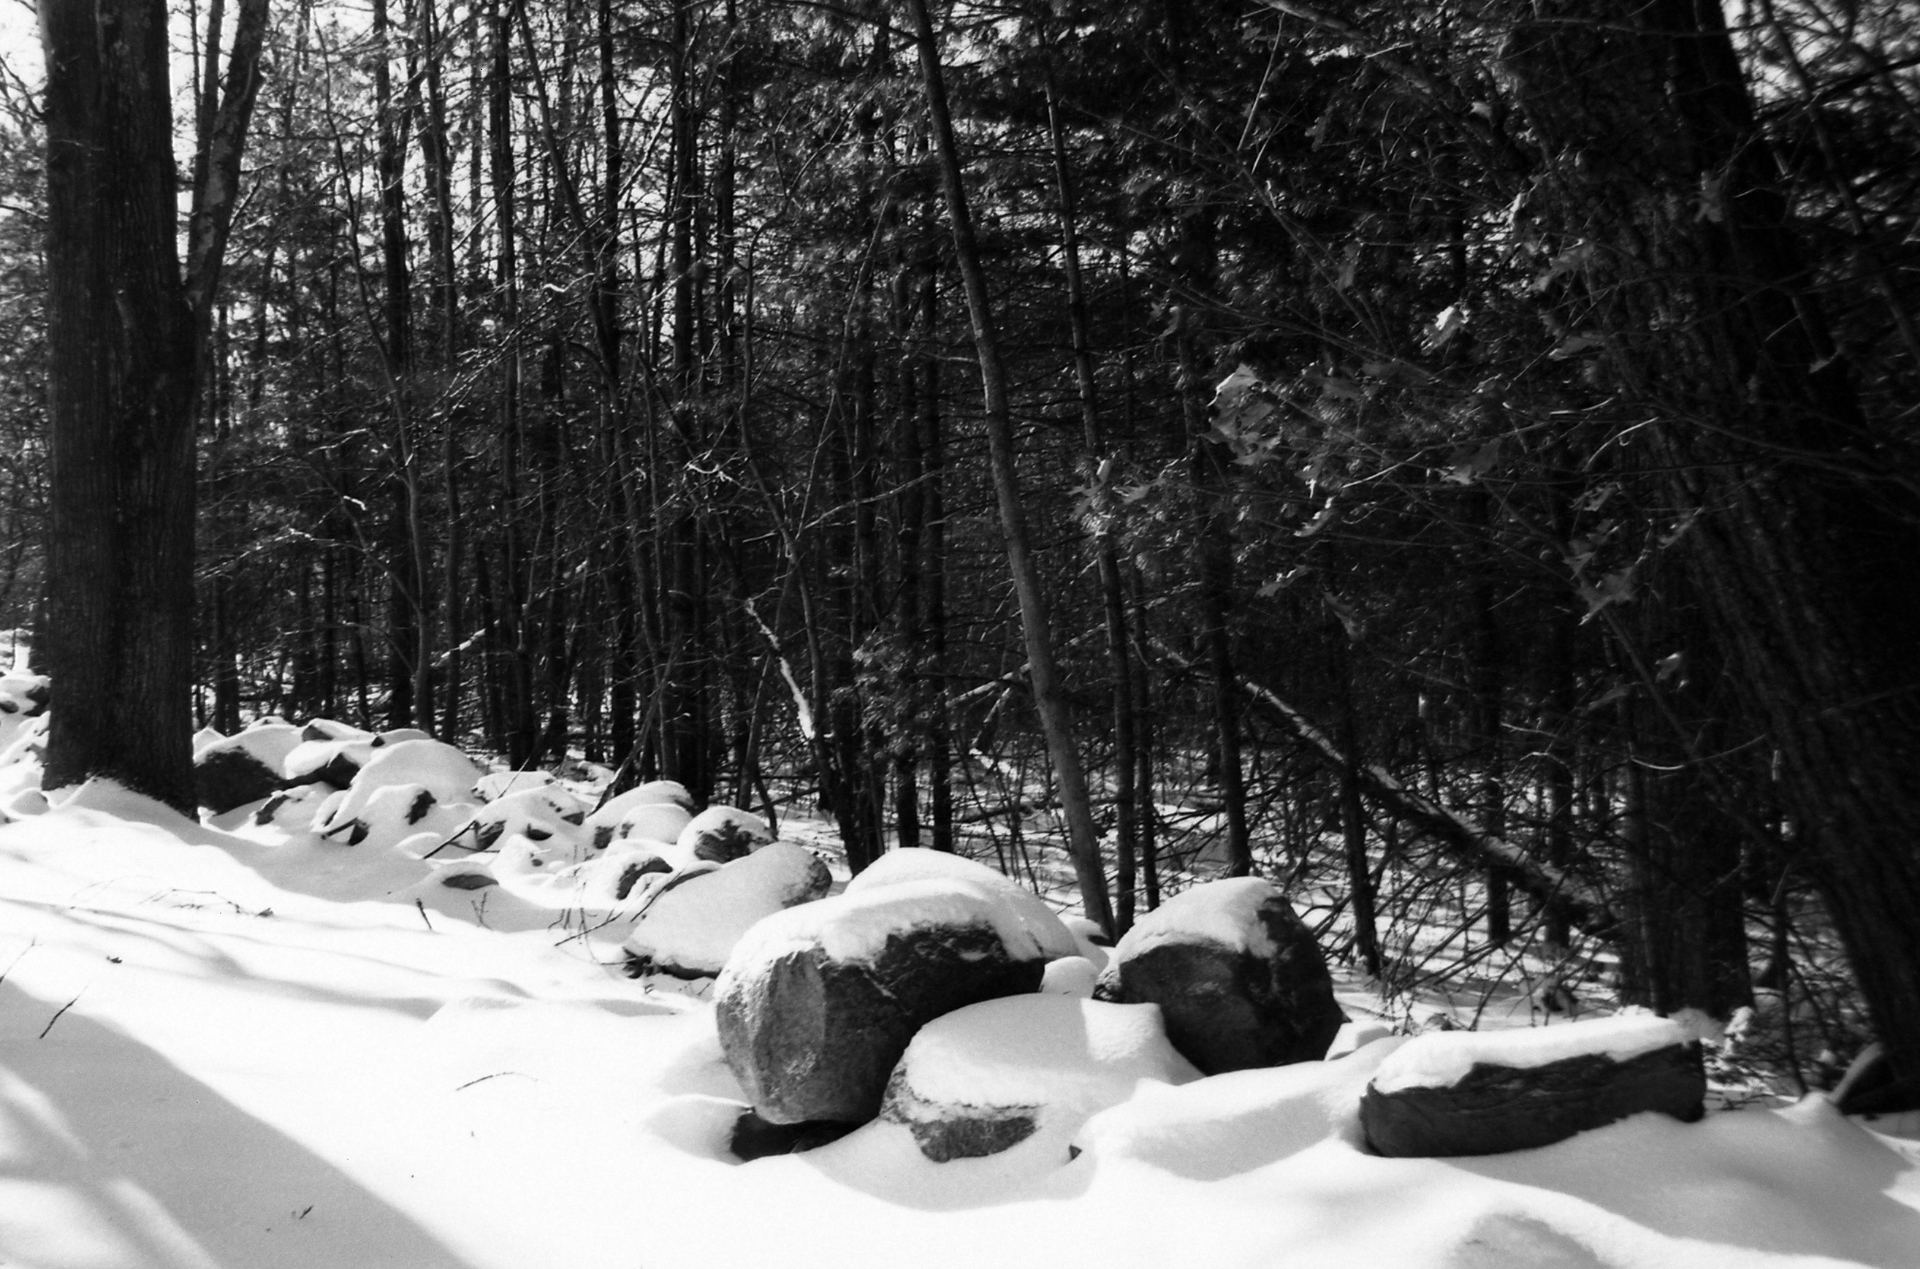 Old rock wall and snow